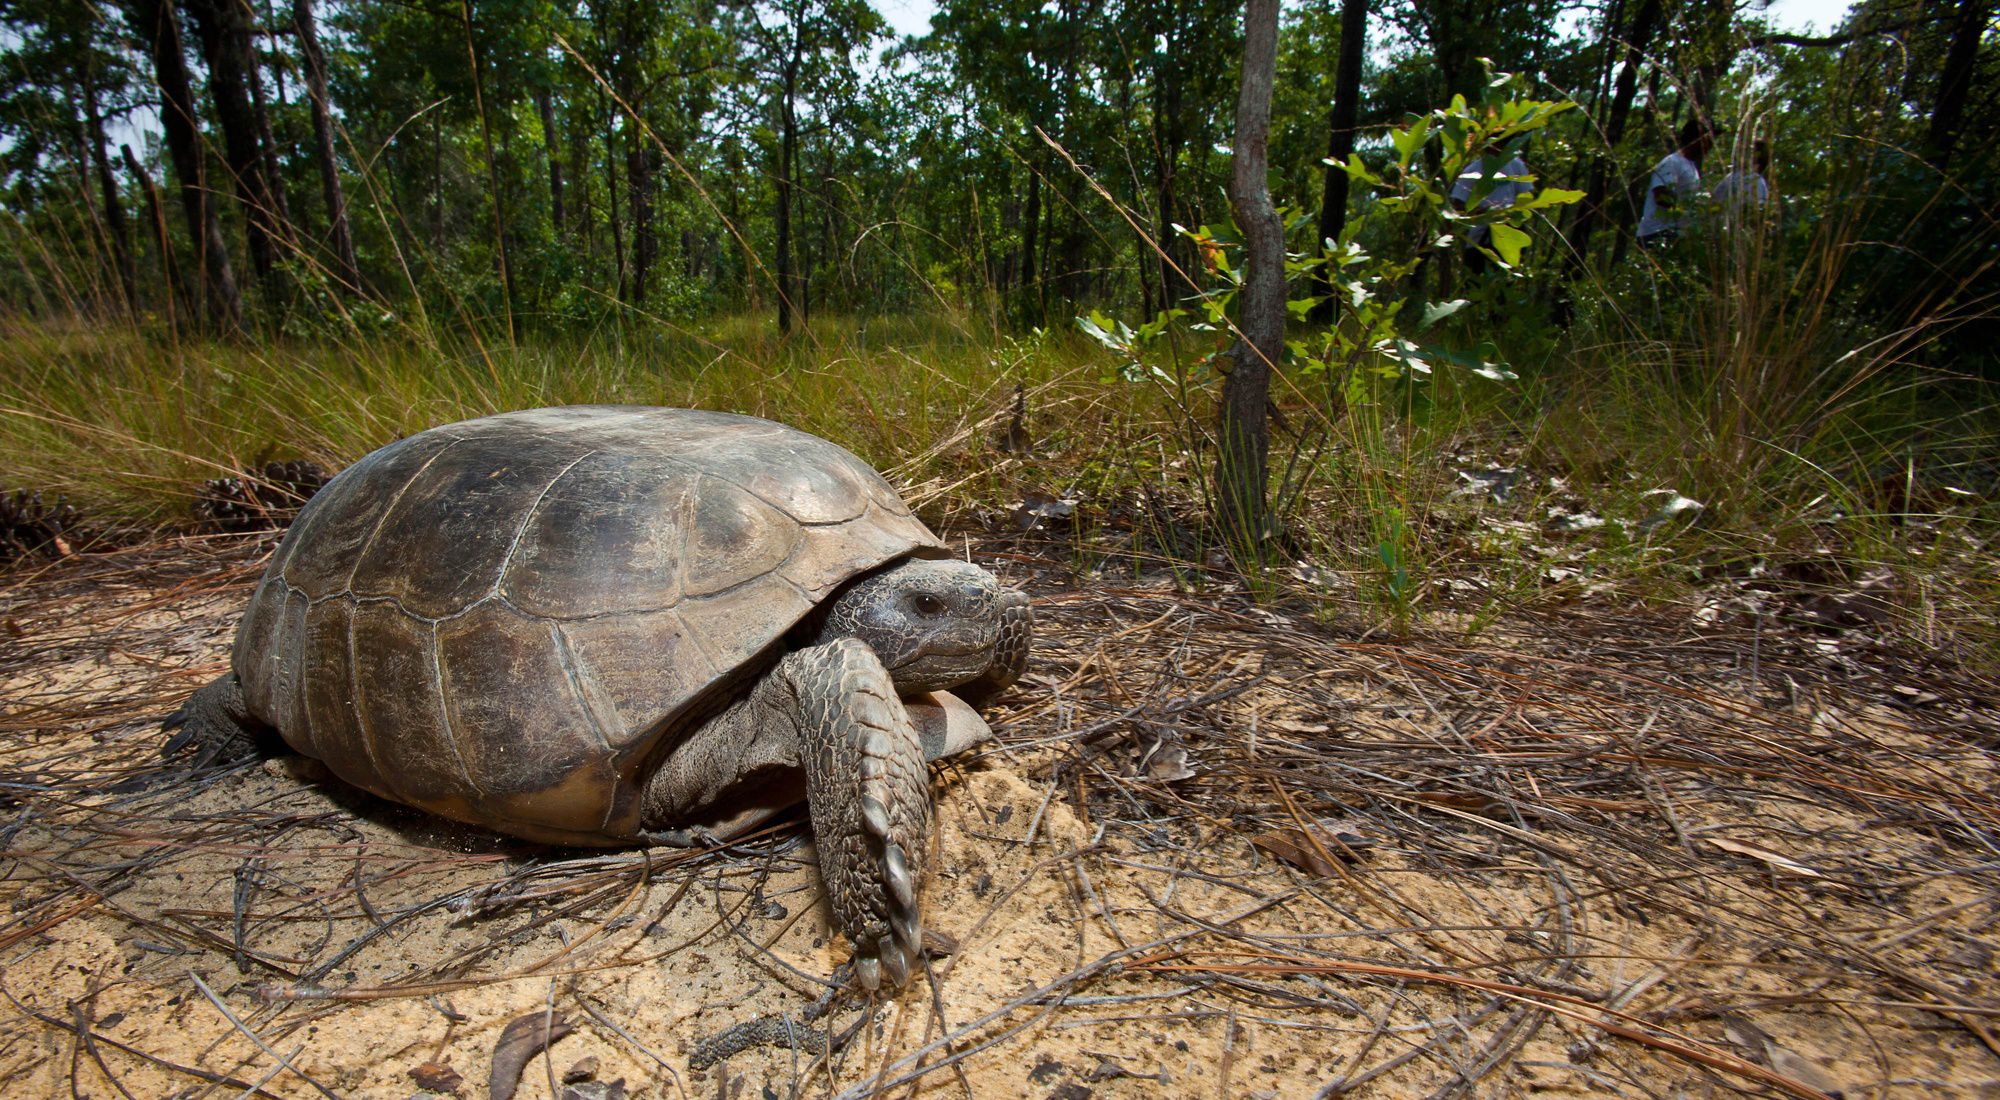 Happy Gopher Tortoise Day and another wonderful sayin from a coworker!